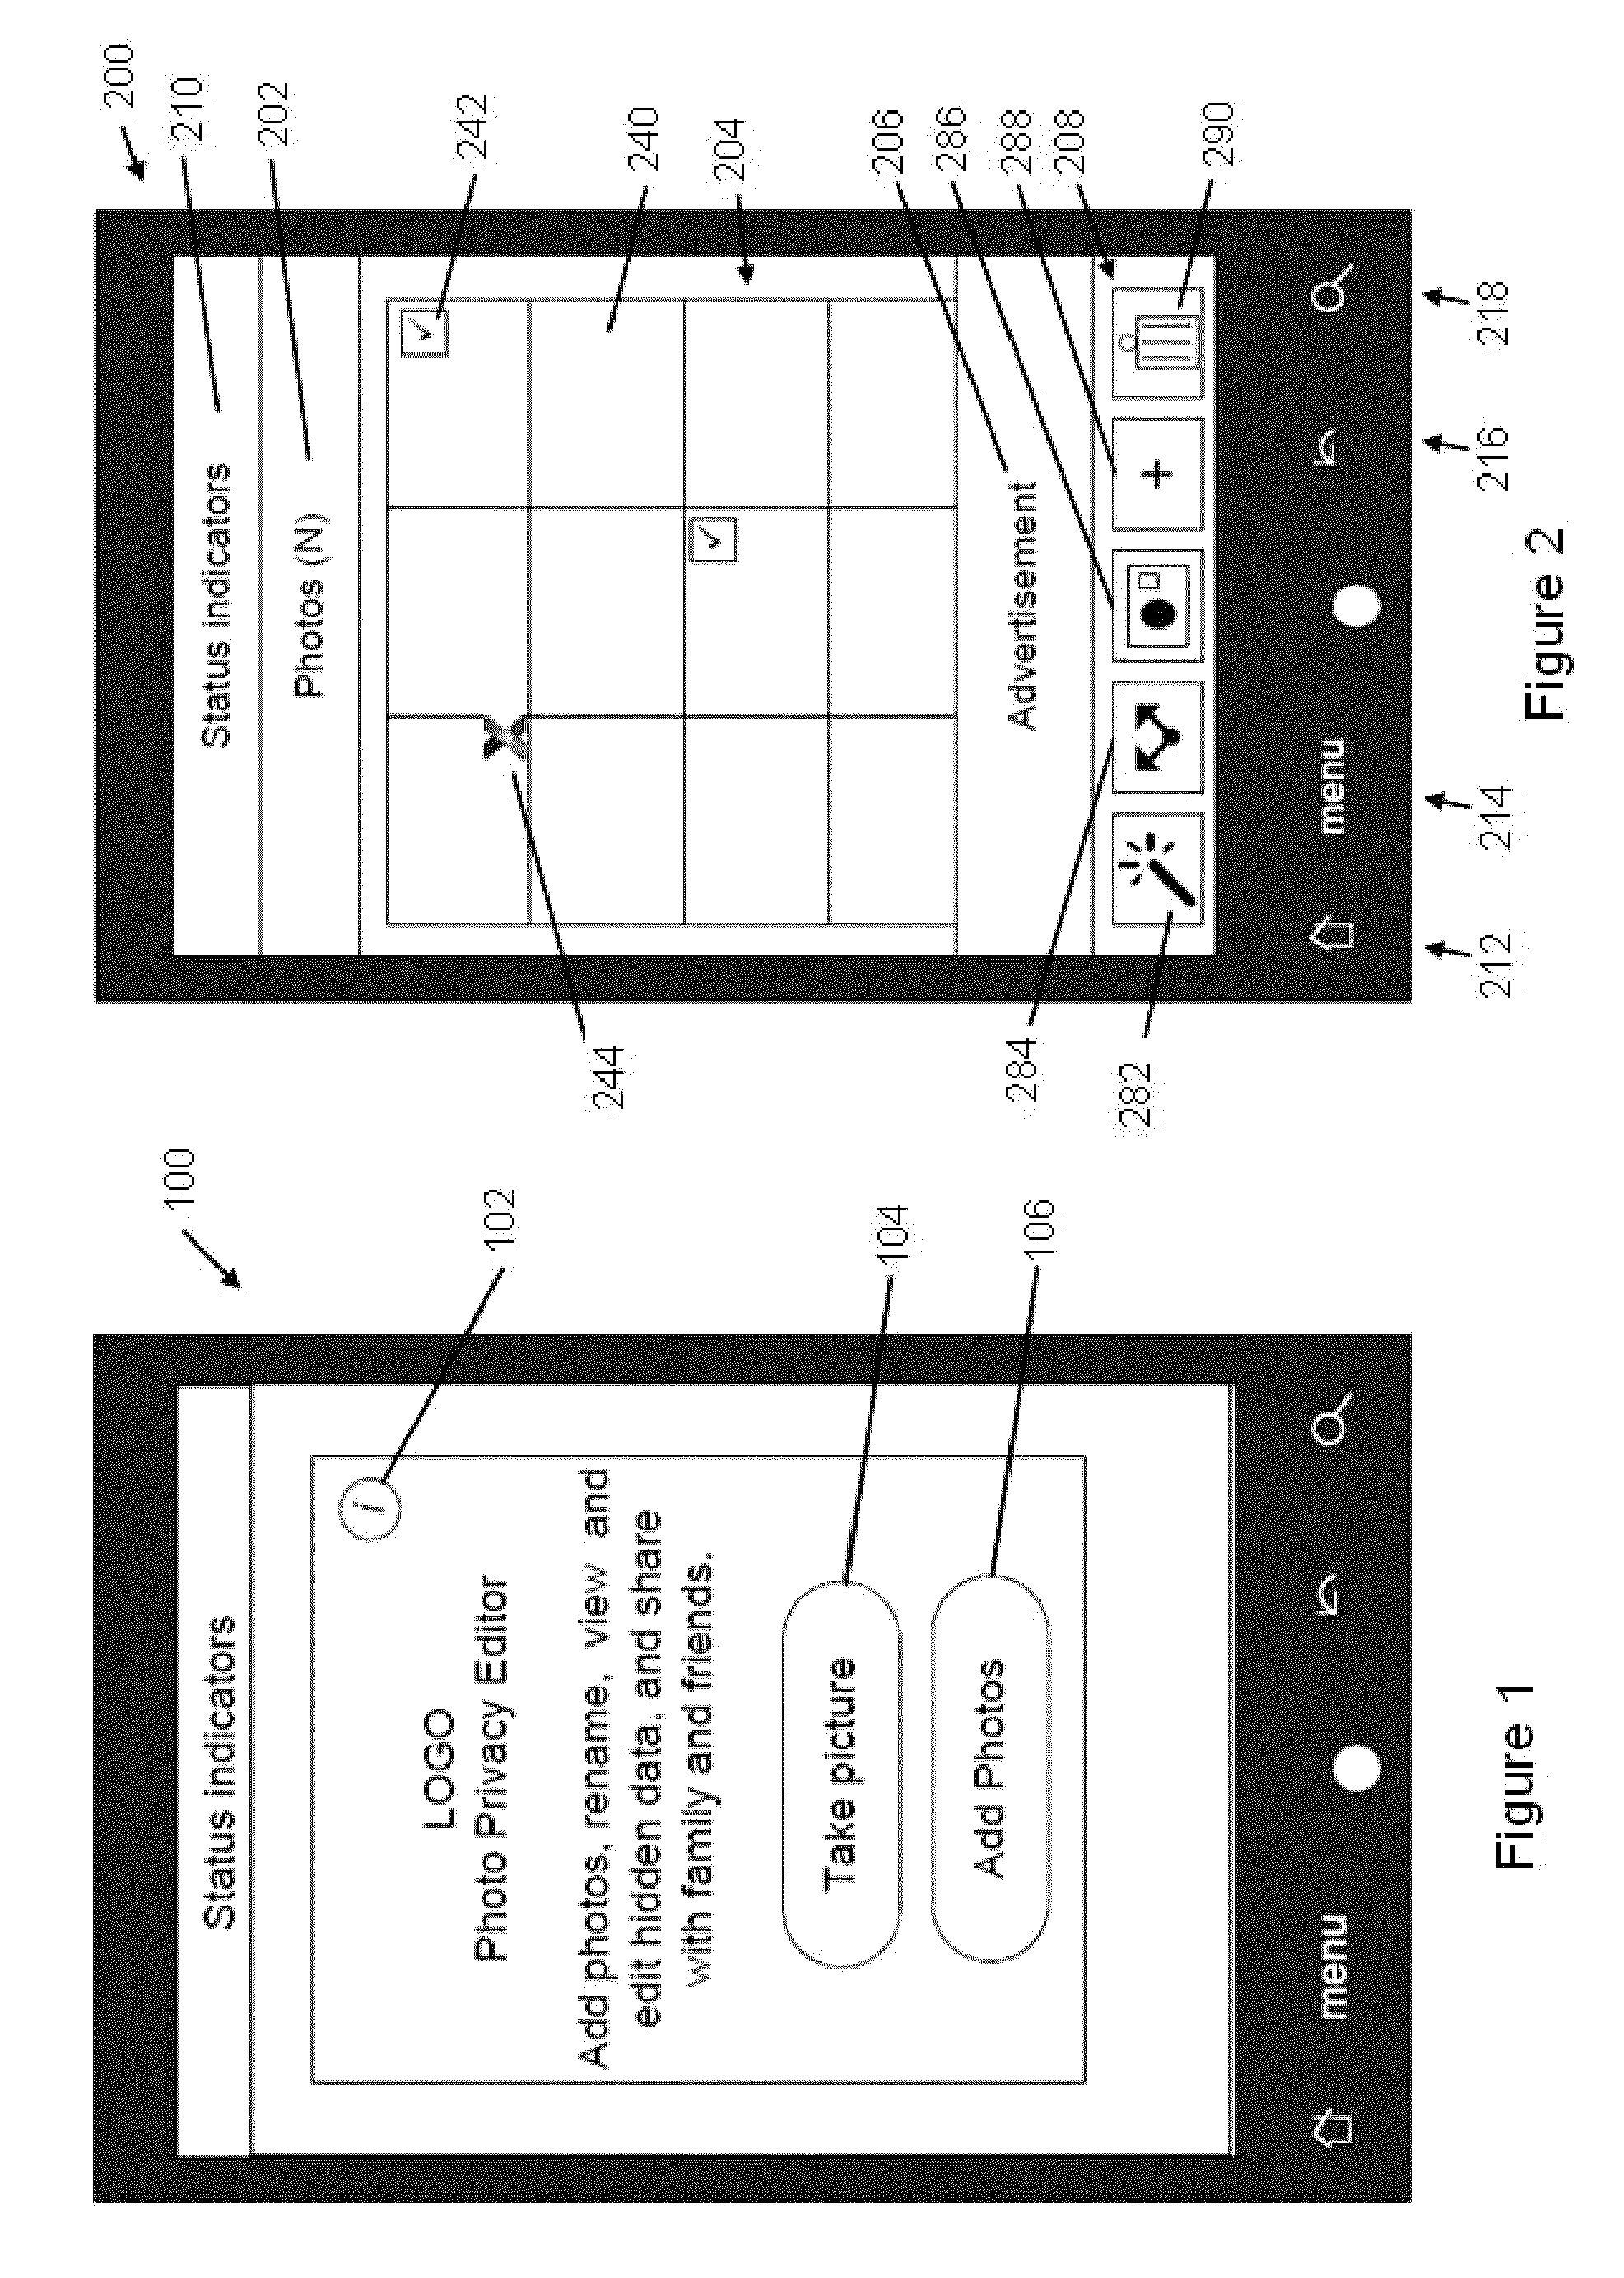 System and method for controlling and organizing metadata associated with on-line content